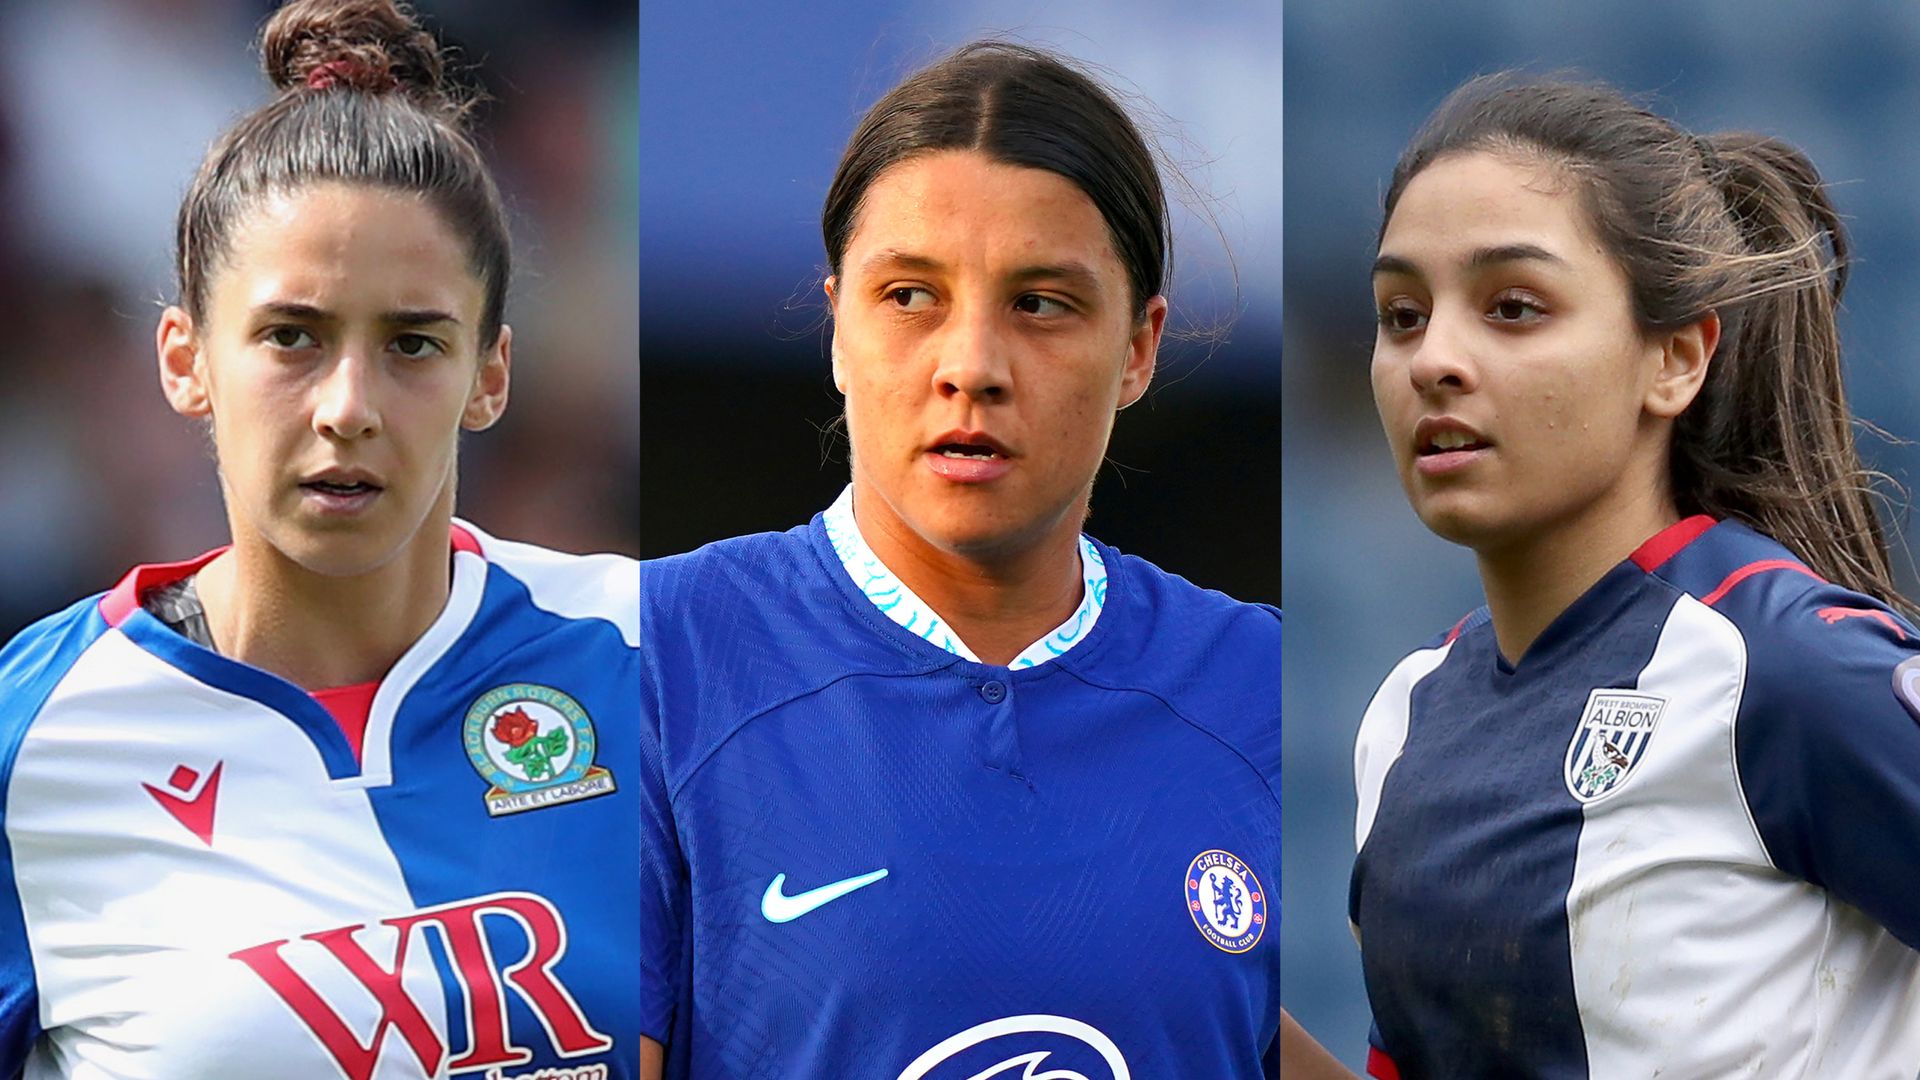 Tailor: Player timeline shows South Asian women exist in football